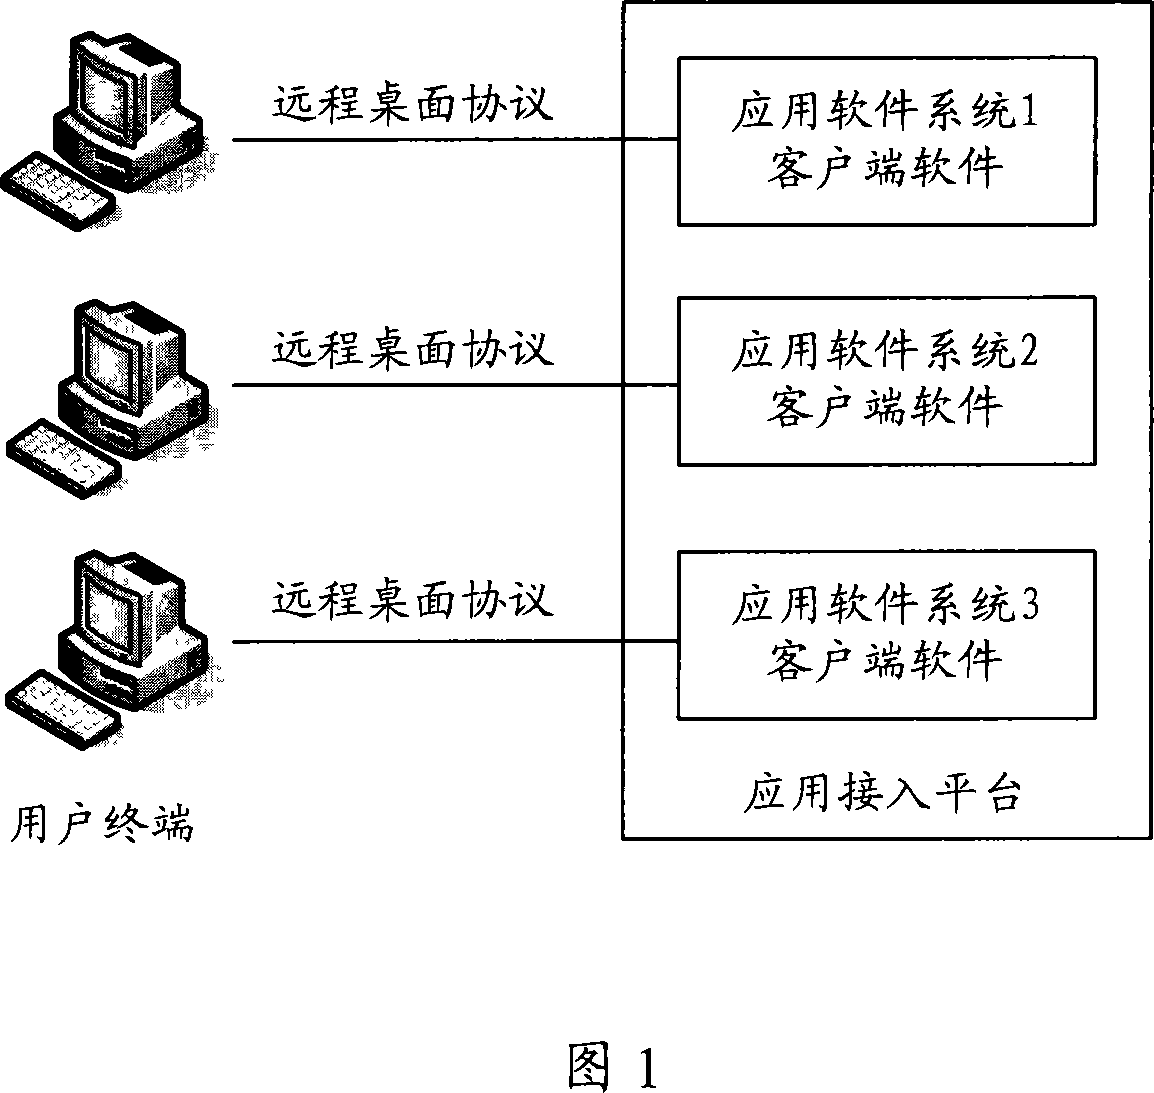 A network logging on system and the corresponding configuration method and methods for logging on the application system